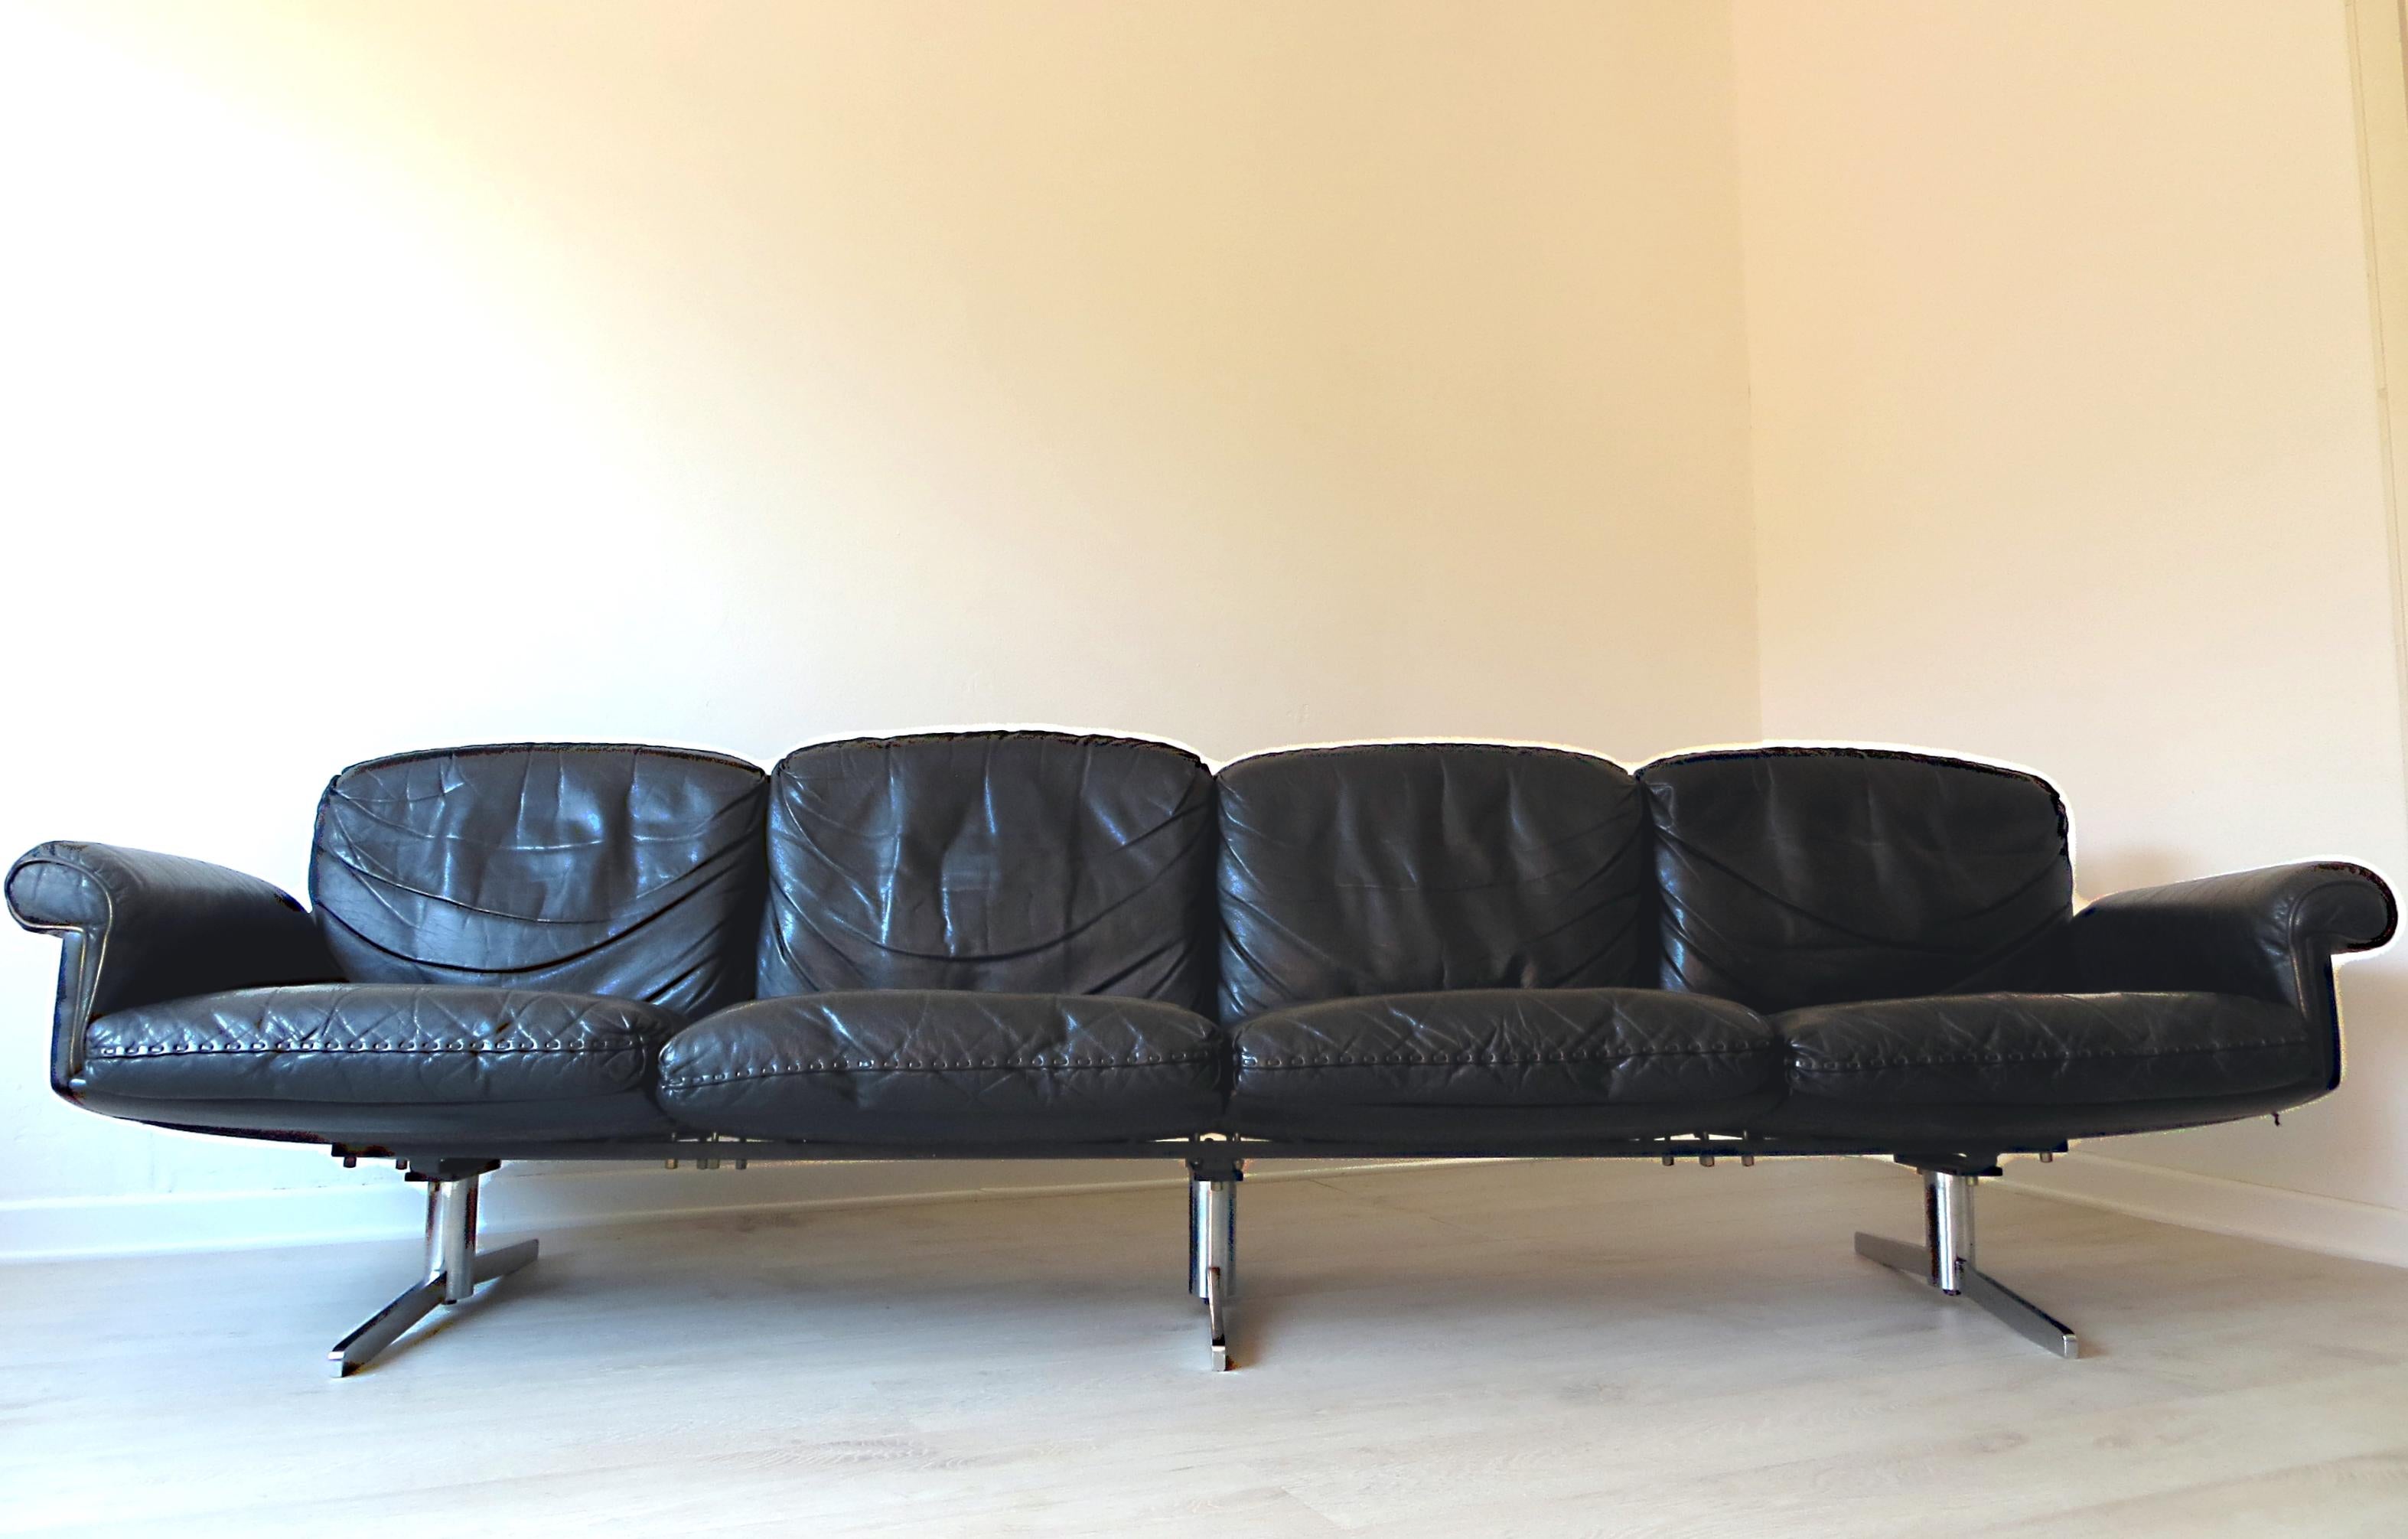 The DS-31 sofa or bench model series is one of the design classics from the worldwide renowned leather manufacturer and 
luxury Swiss brand De Sede. 

+ Very rare DS-31 version with 4 seats and with chrome feet base of the 1st generation from